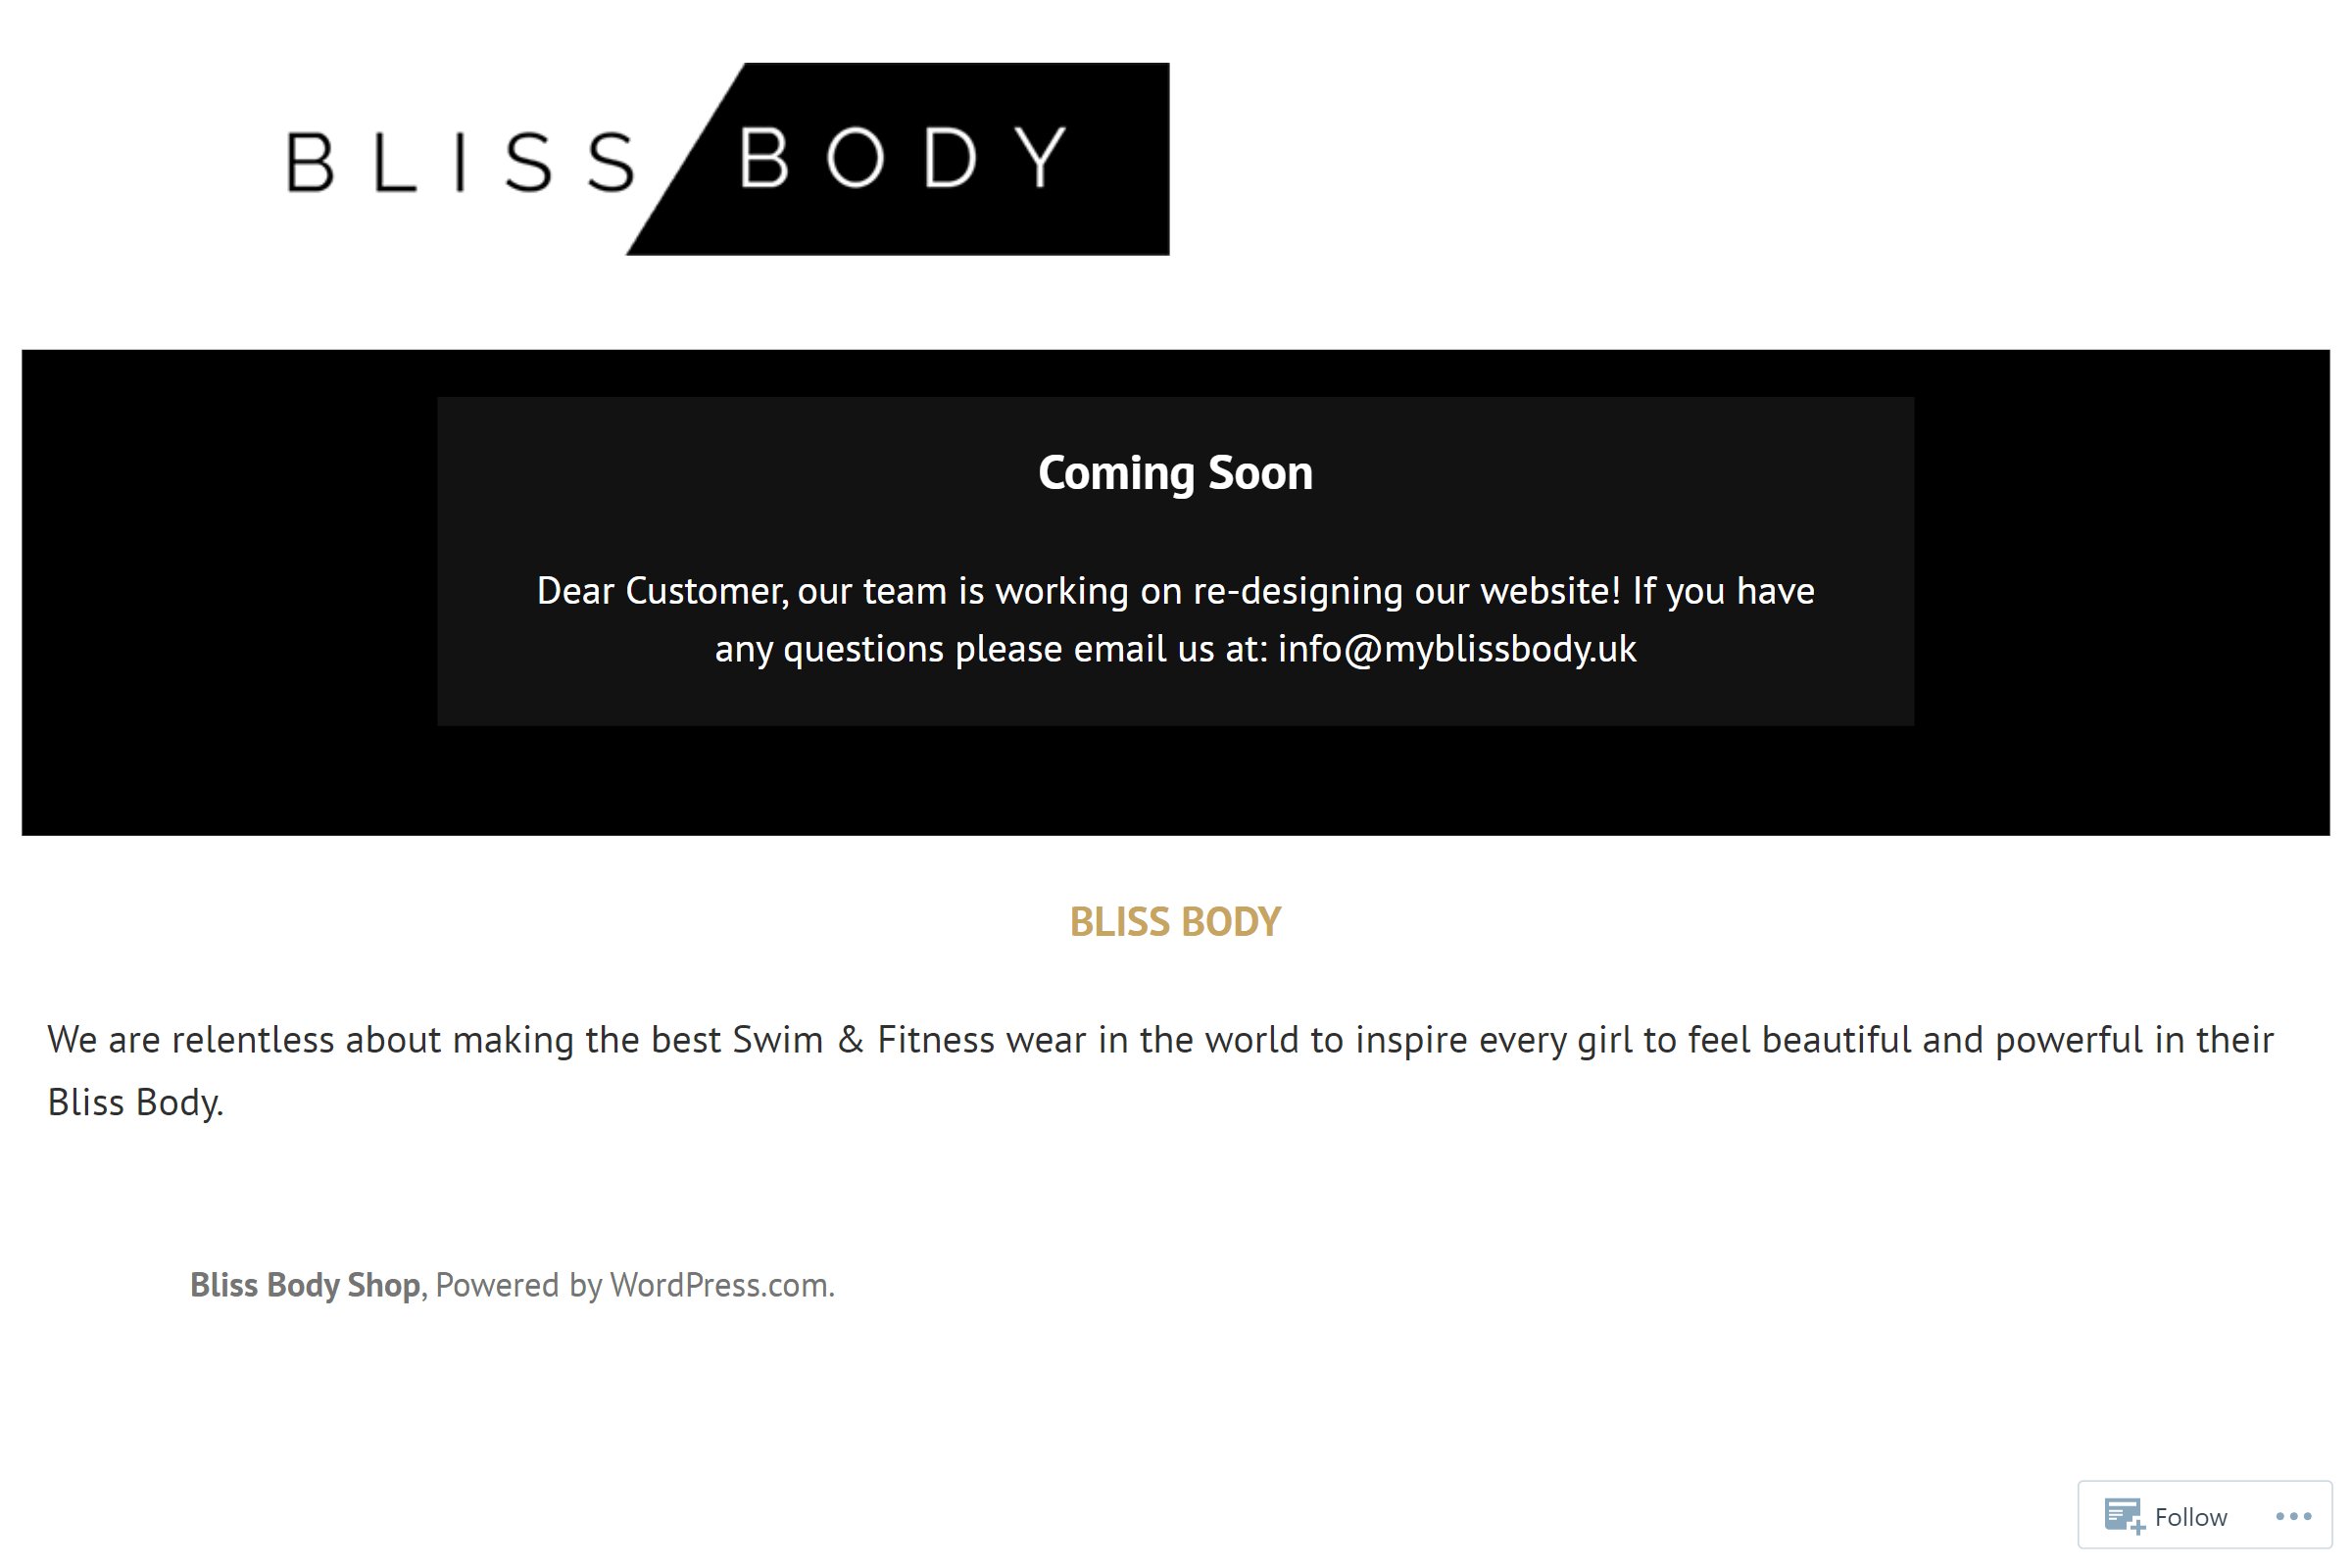 Bliss Body Shop on ReadSomeReviews